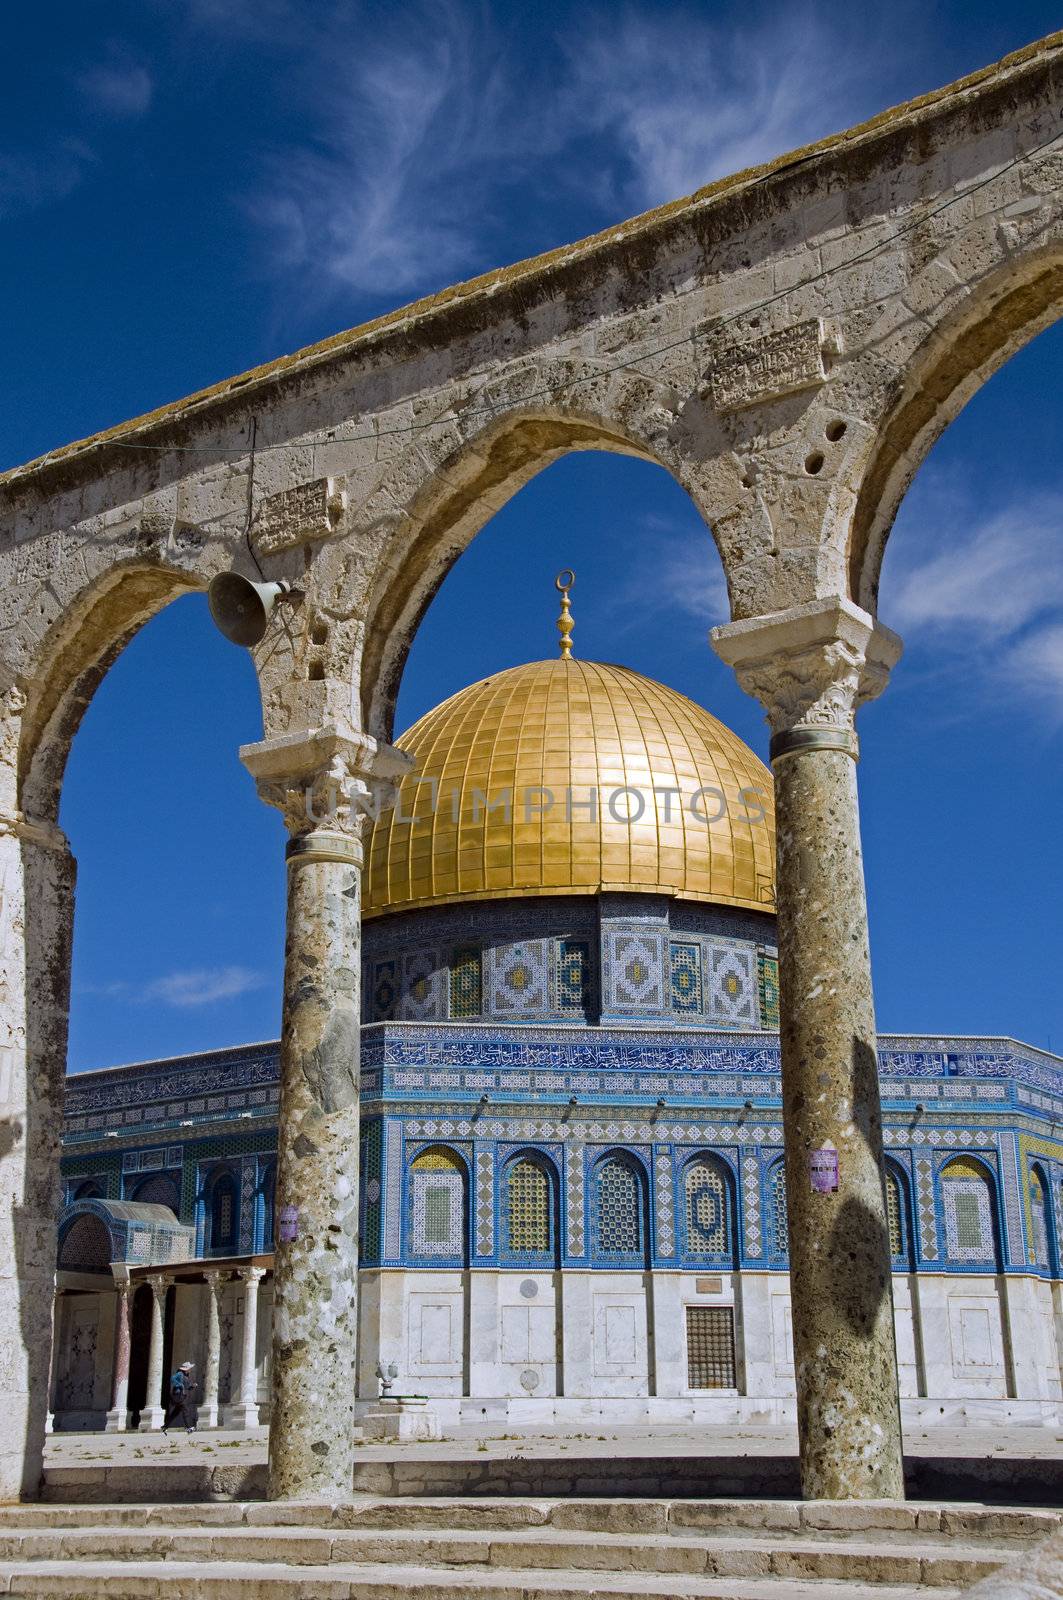 Jerusalem - The Dome of the Rock Mosque with blue sky